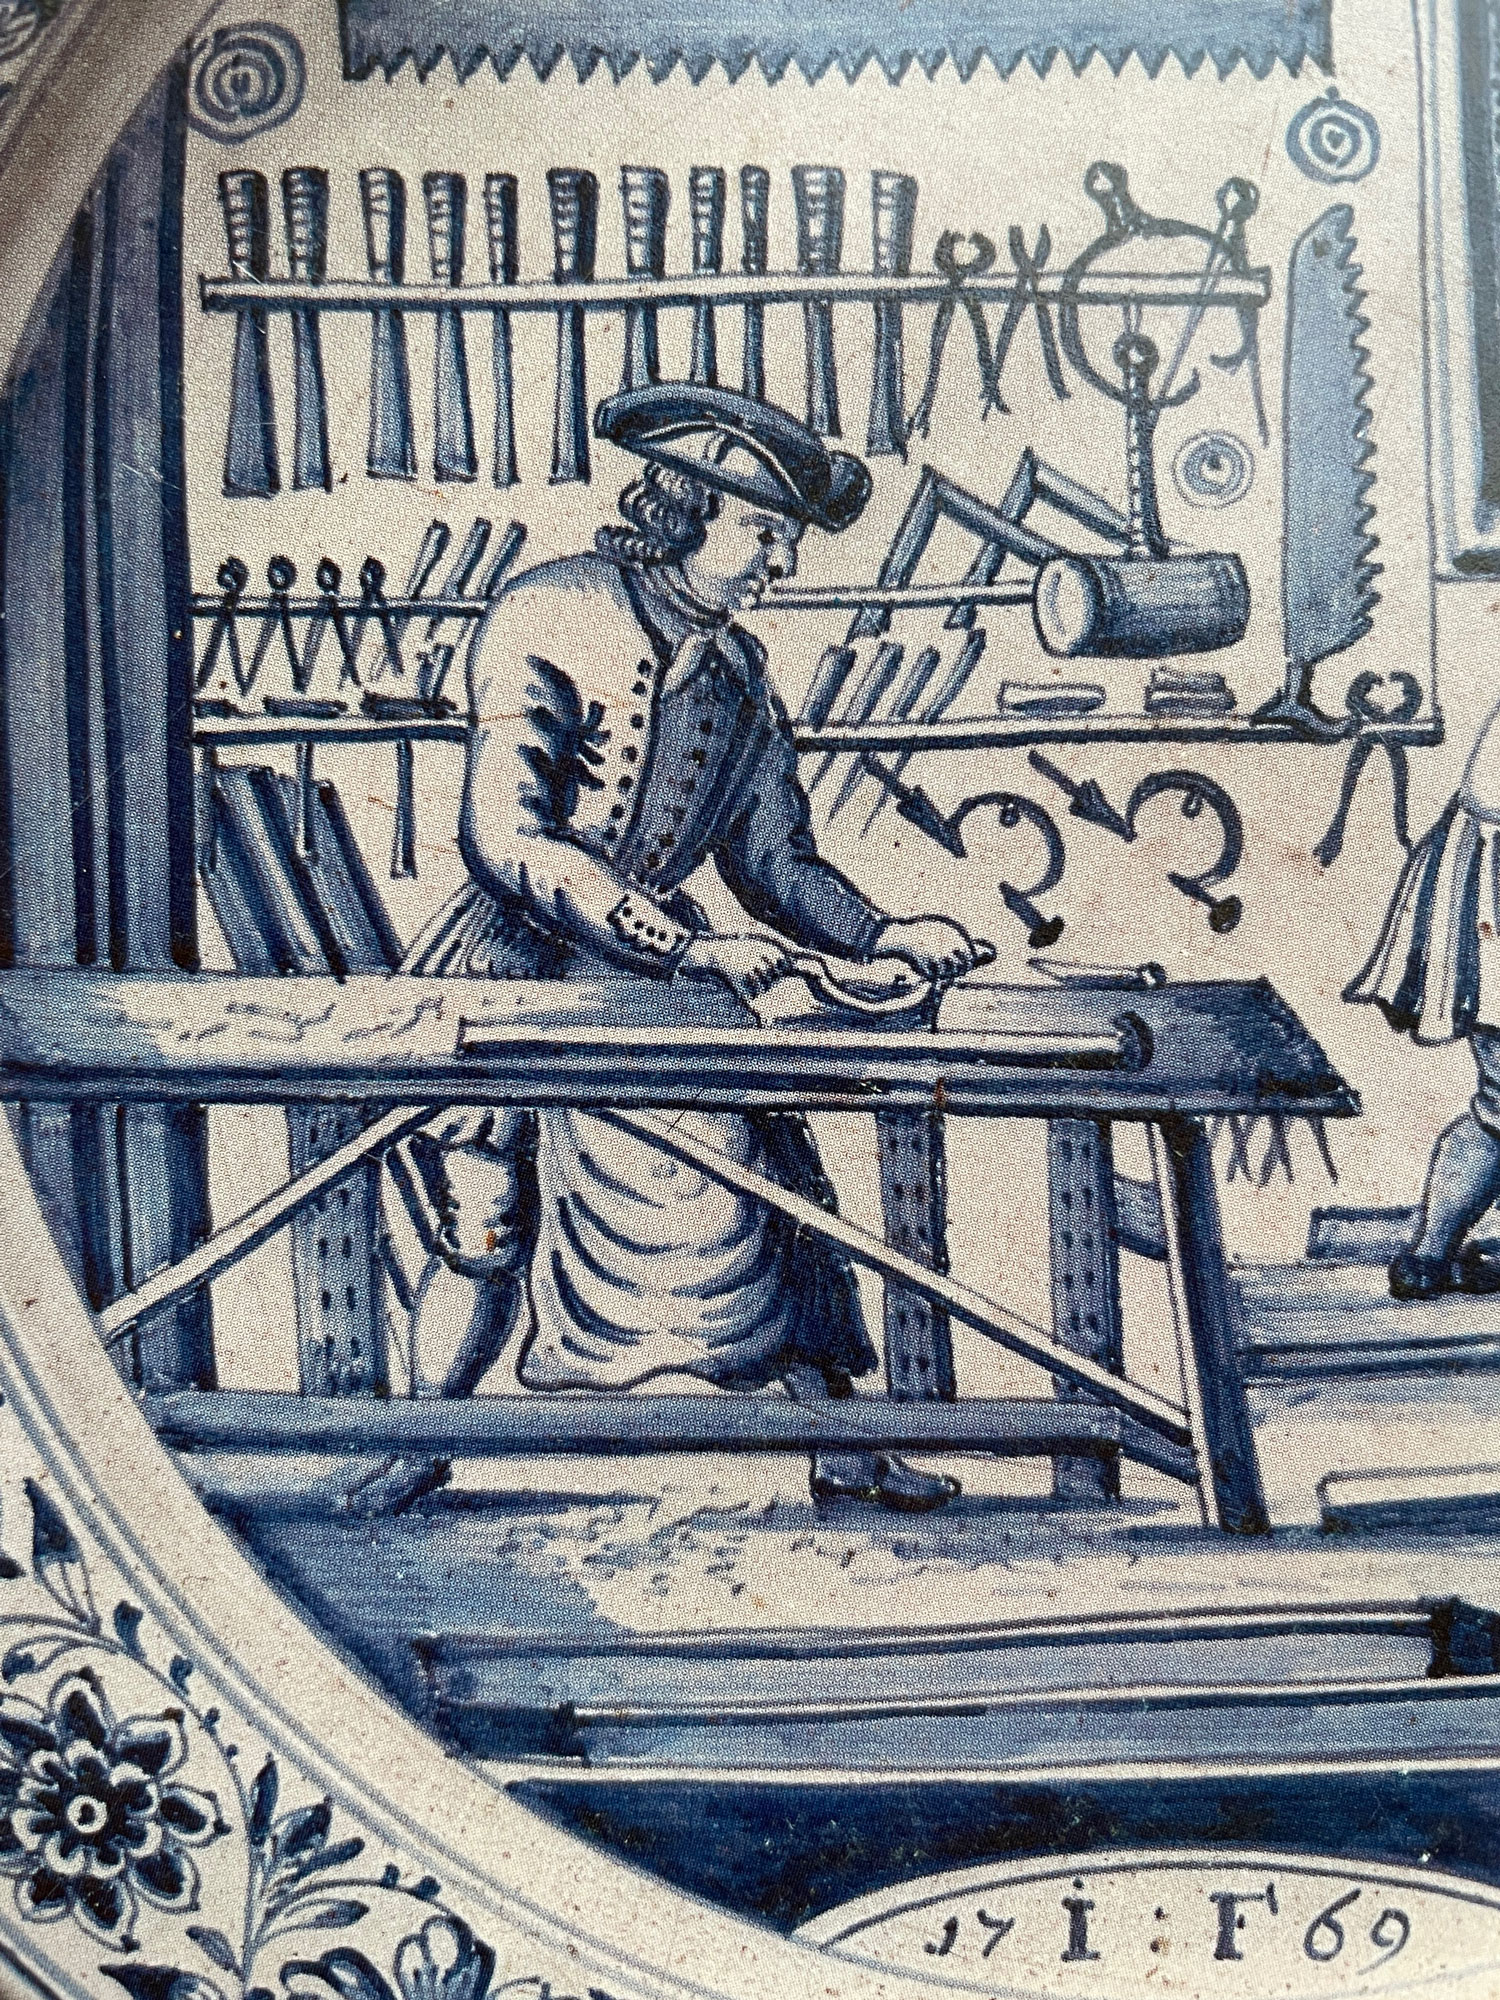 An image of a woodworker at a workbench, perhaps using a travisher or scorp.